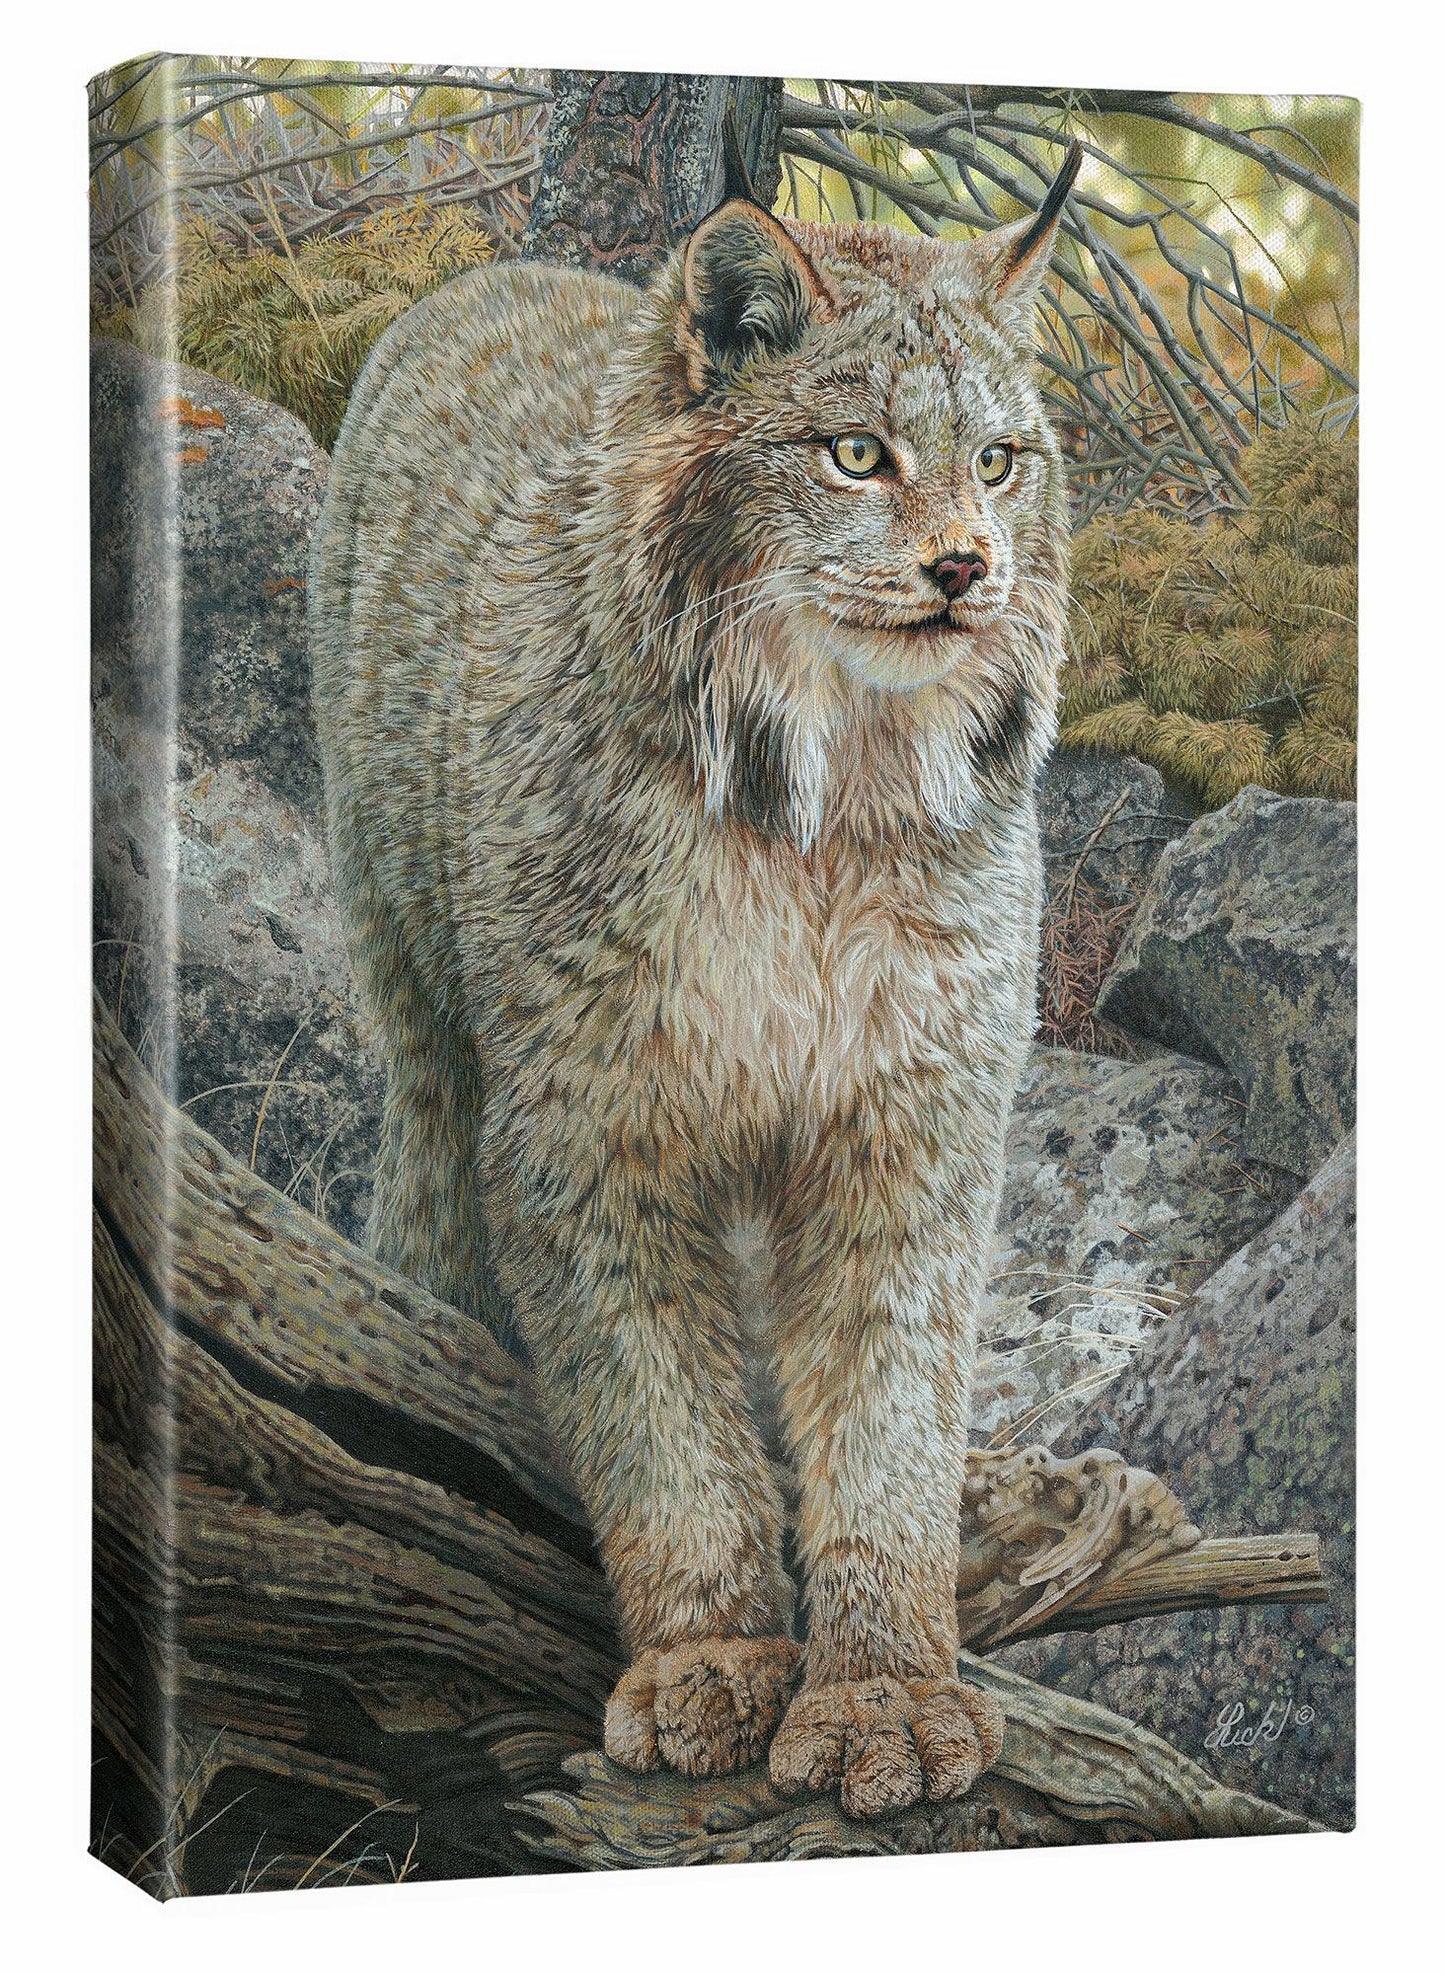 Steppin' Out-Lynx Gallery Wrapped Canvas - Wild Wings